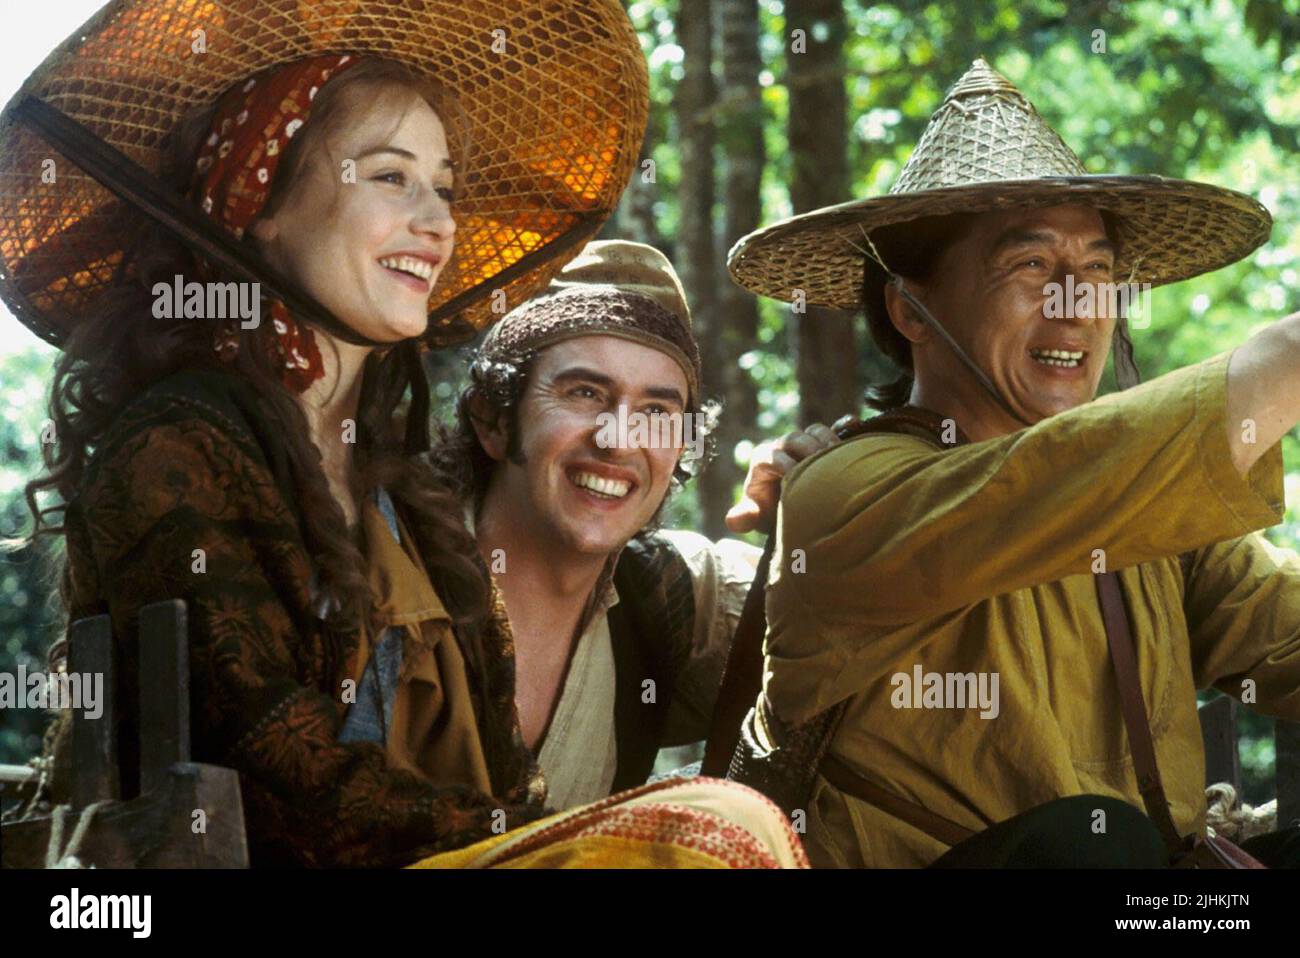 CECILE DE FRANCE, STEVE COOGAN, JACKIE CHAN, AROUND THE WORLD IN 80 DAYS, 2004 Stock Photo